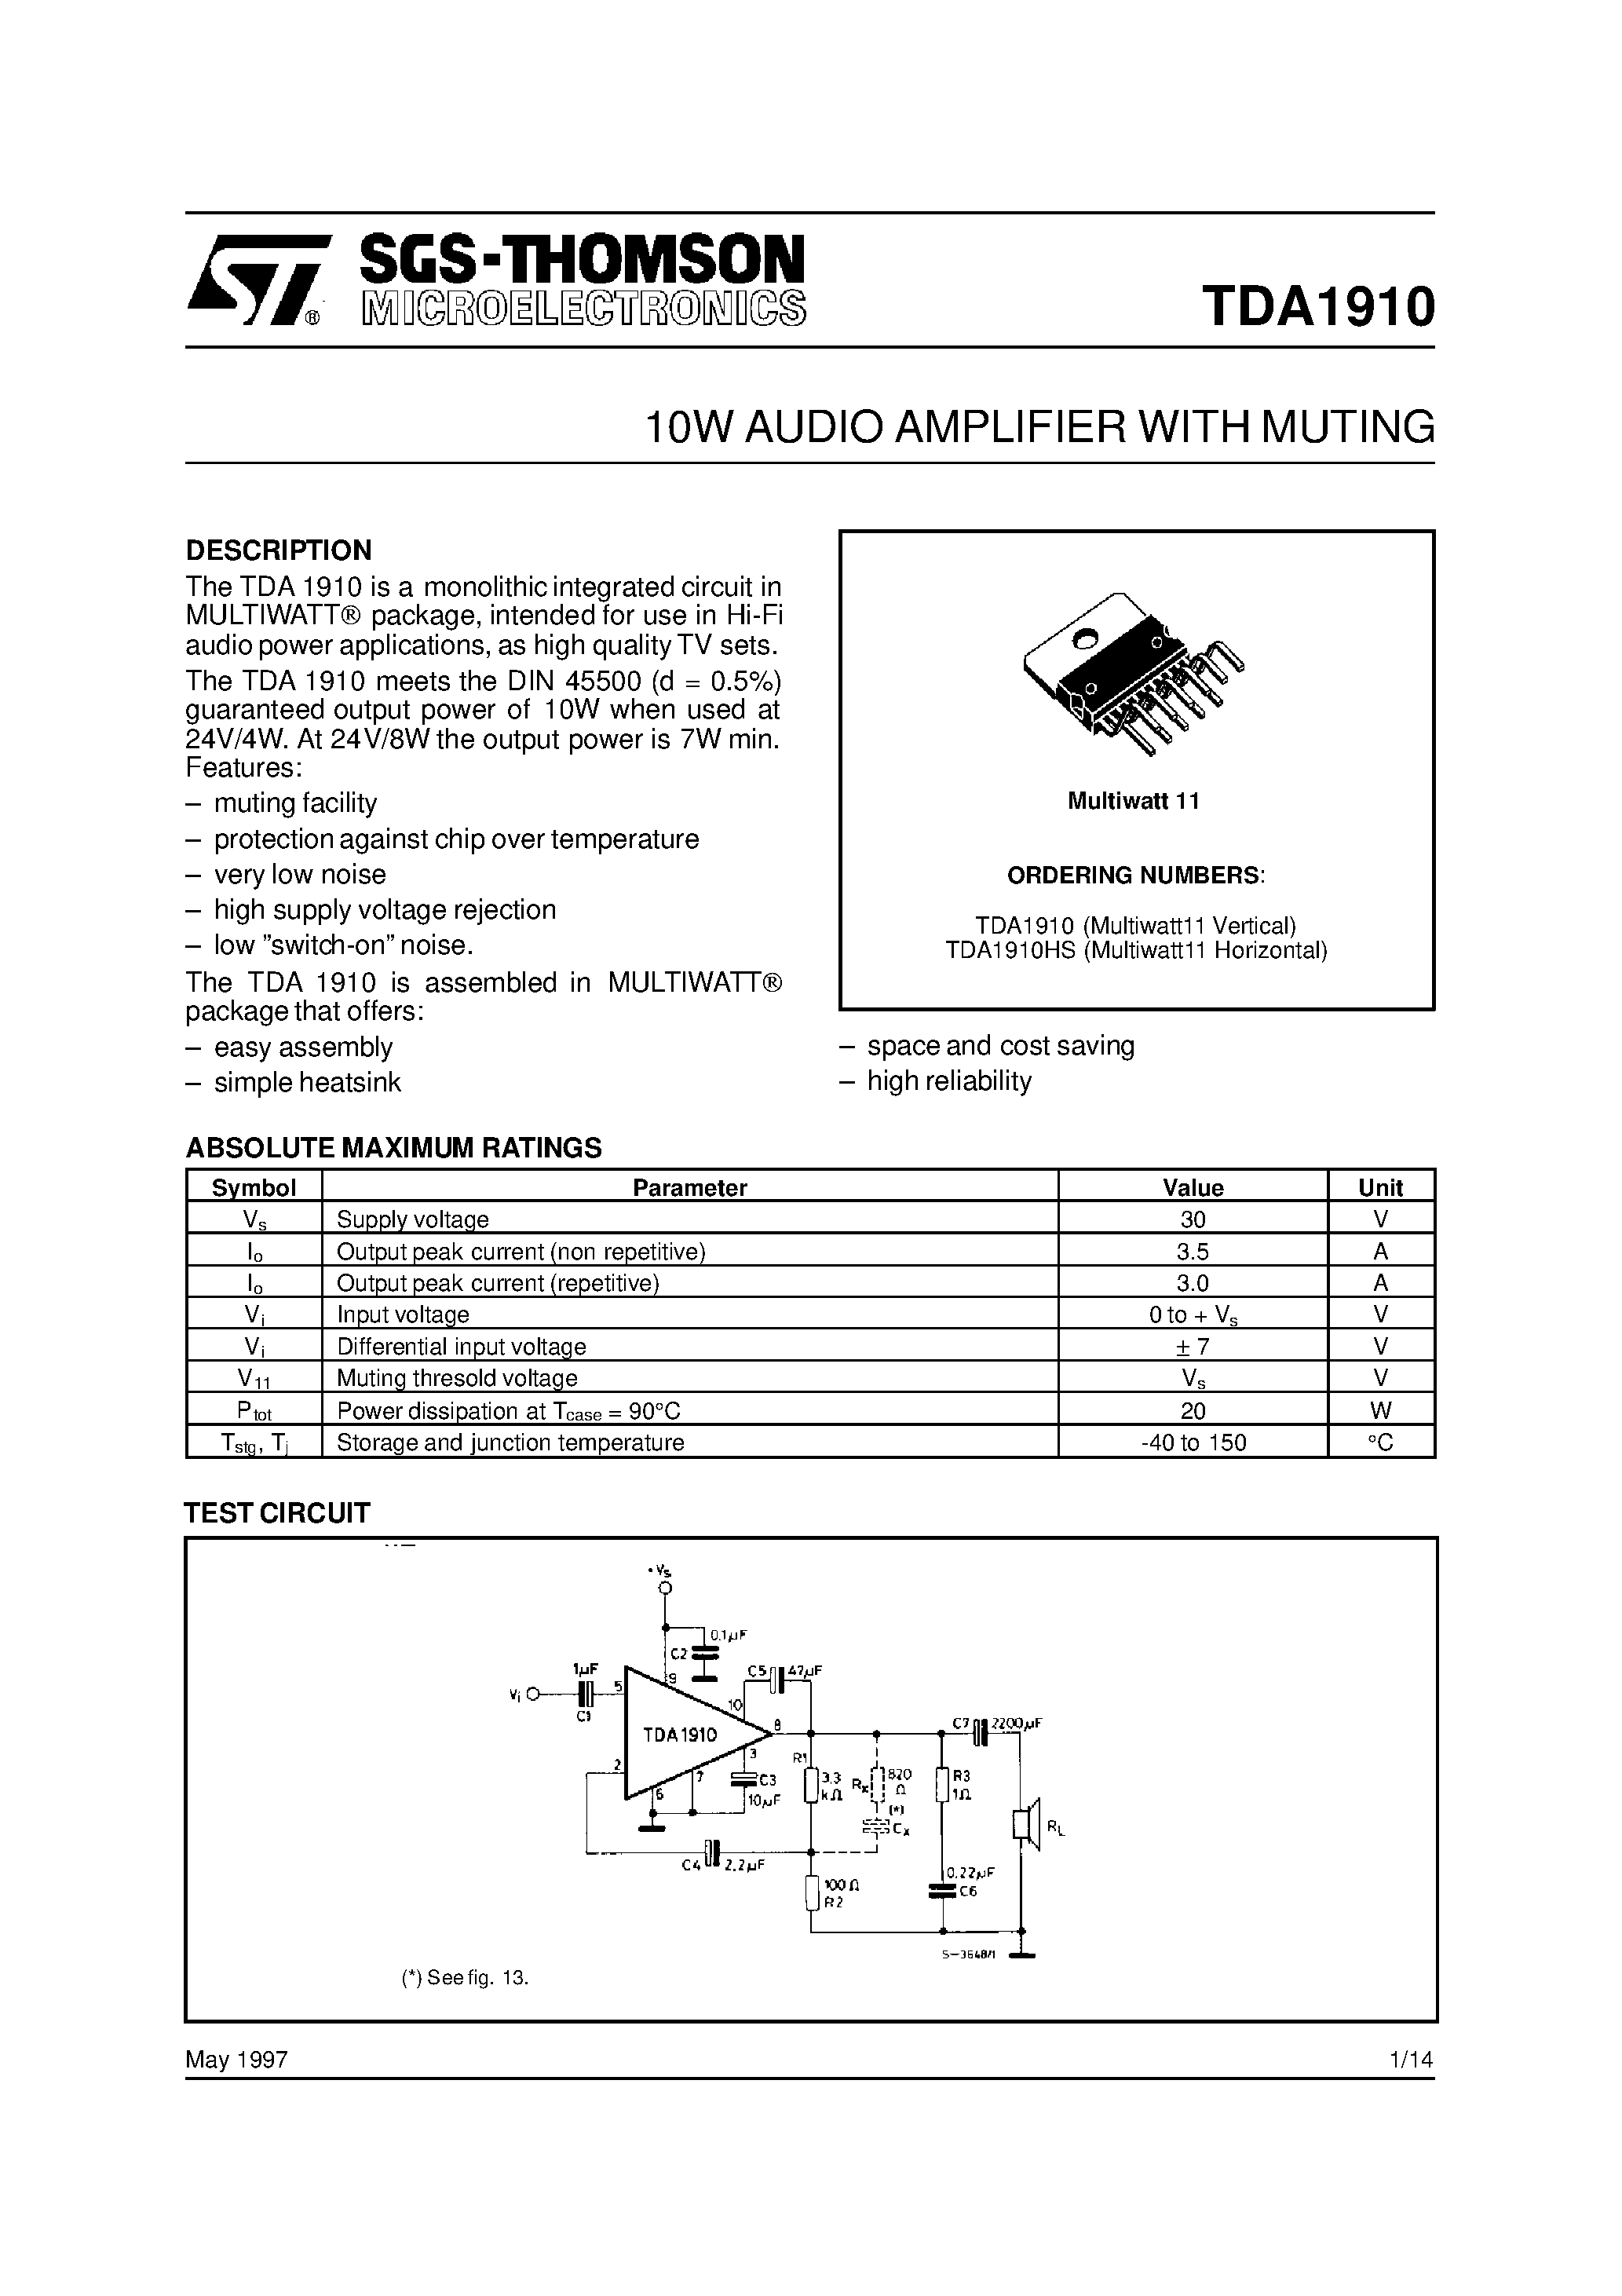 Datasheet TDA1910 - 10W AUDIO AMPLIFIER WITH MUTING page 1